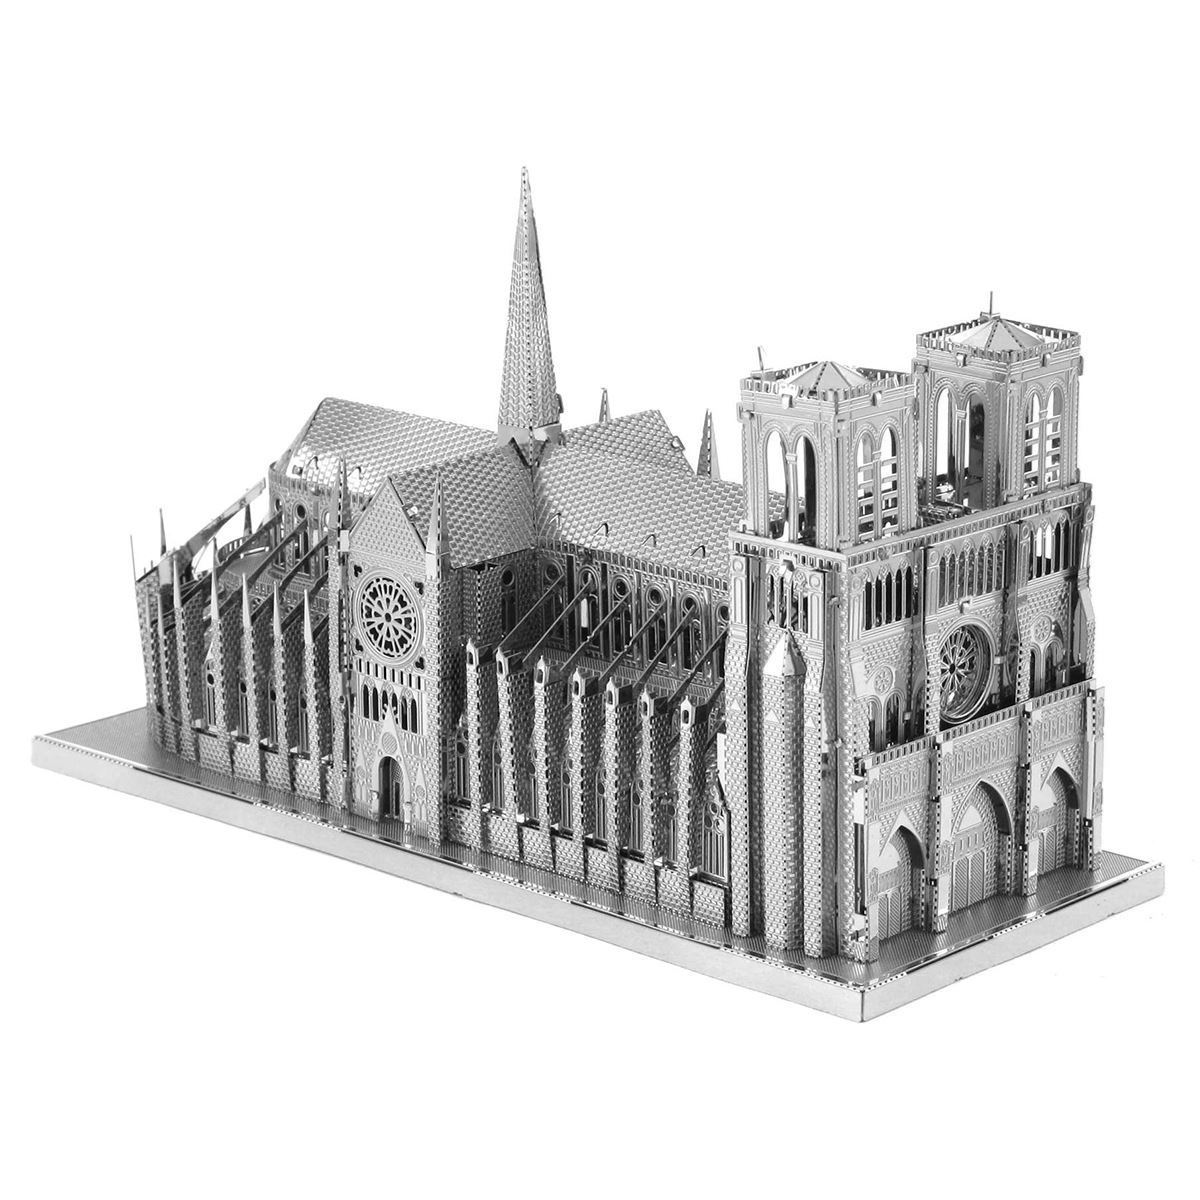 Fascinations ICONX Notre Dame Cathedral 3d Metal Model Kit for sale online 